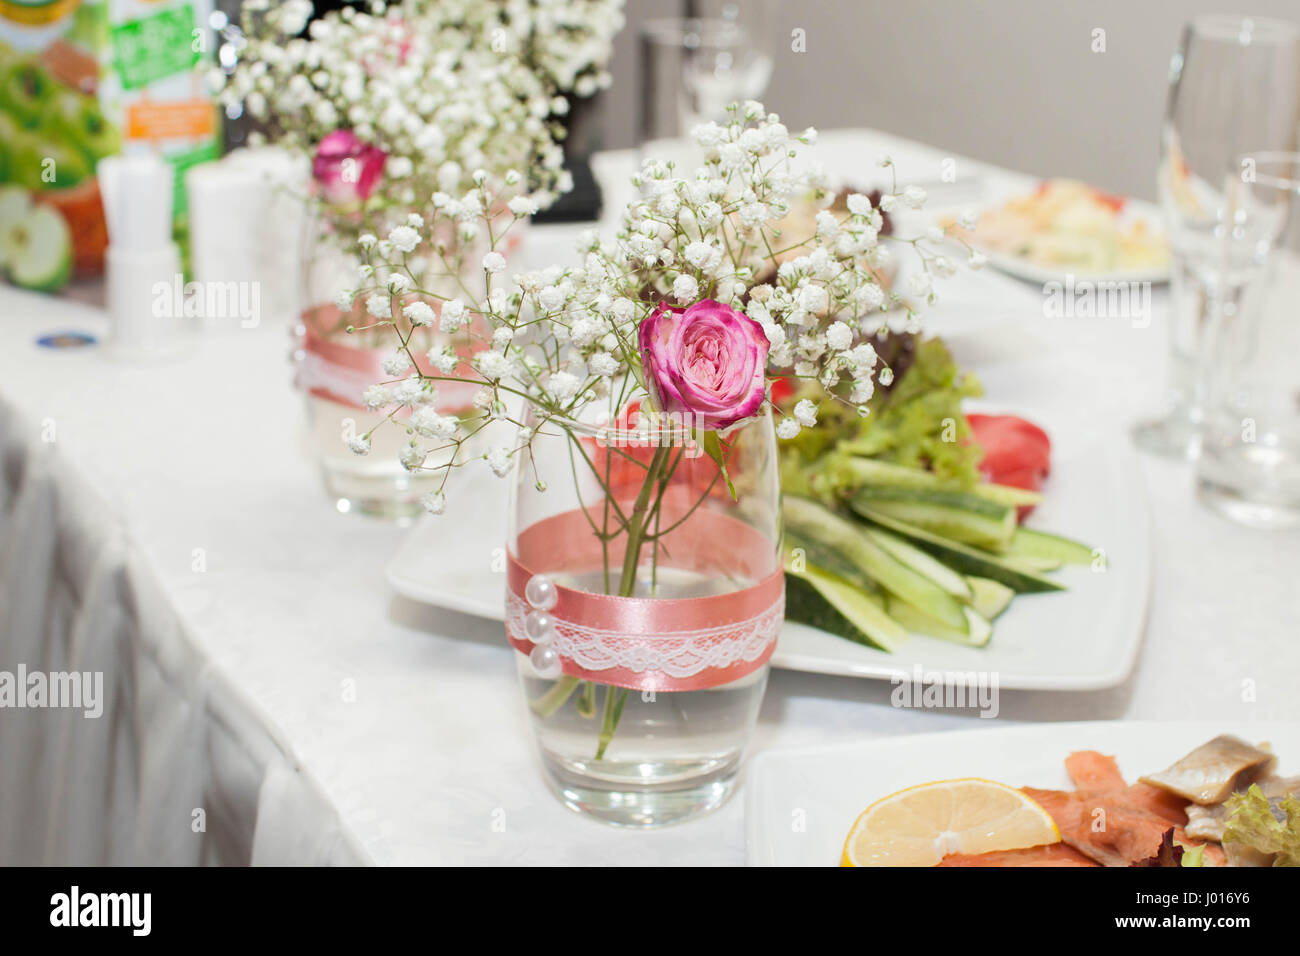 Jar with rose and baby's breath. Wedding decorations. Close-up Stock Photo